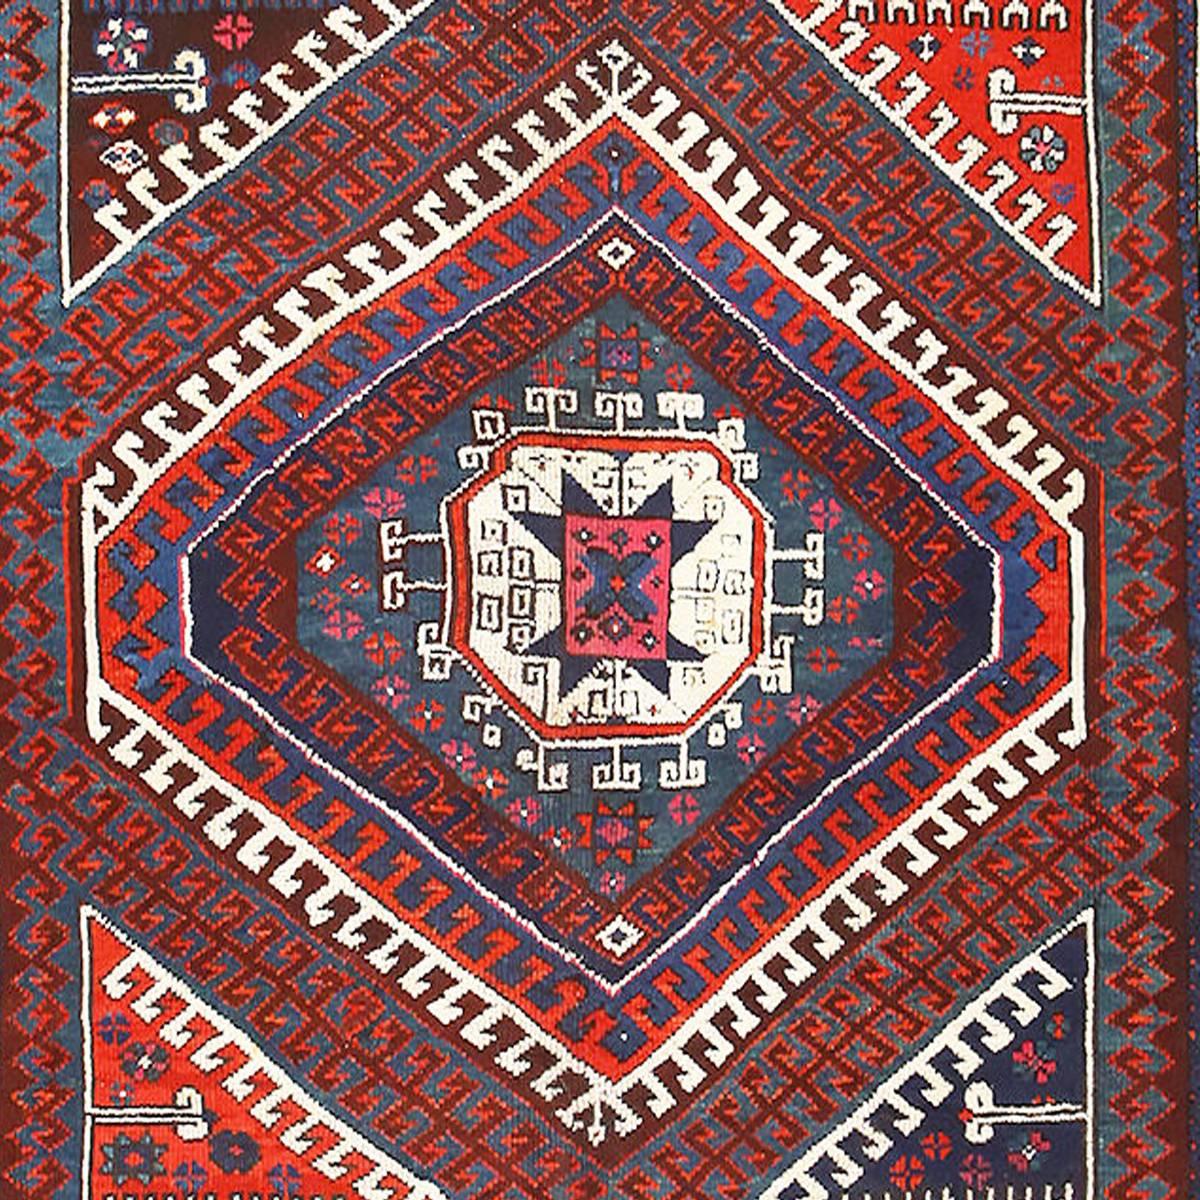 Beautiful and Collectible Tribal Design Antique Turkish Bergama Rug, Country of Origin / Rug Type: Turkish Rugs, Circa Date: Late 19th Century. Size: 7 ft x 9 ft 7 in (2.13 m x 2.92 m)

This medley of dark blue with shades of red, accented by bright